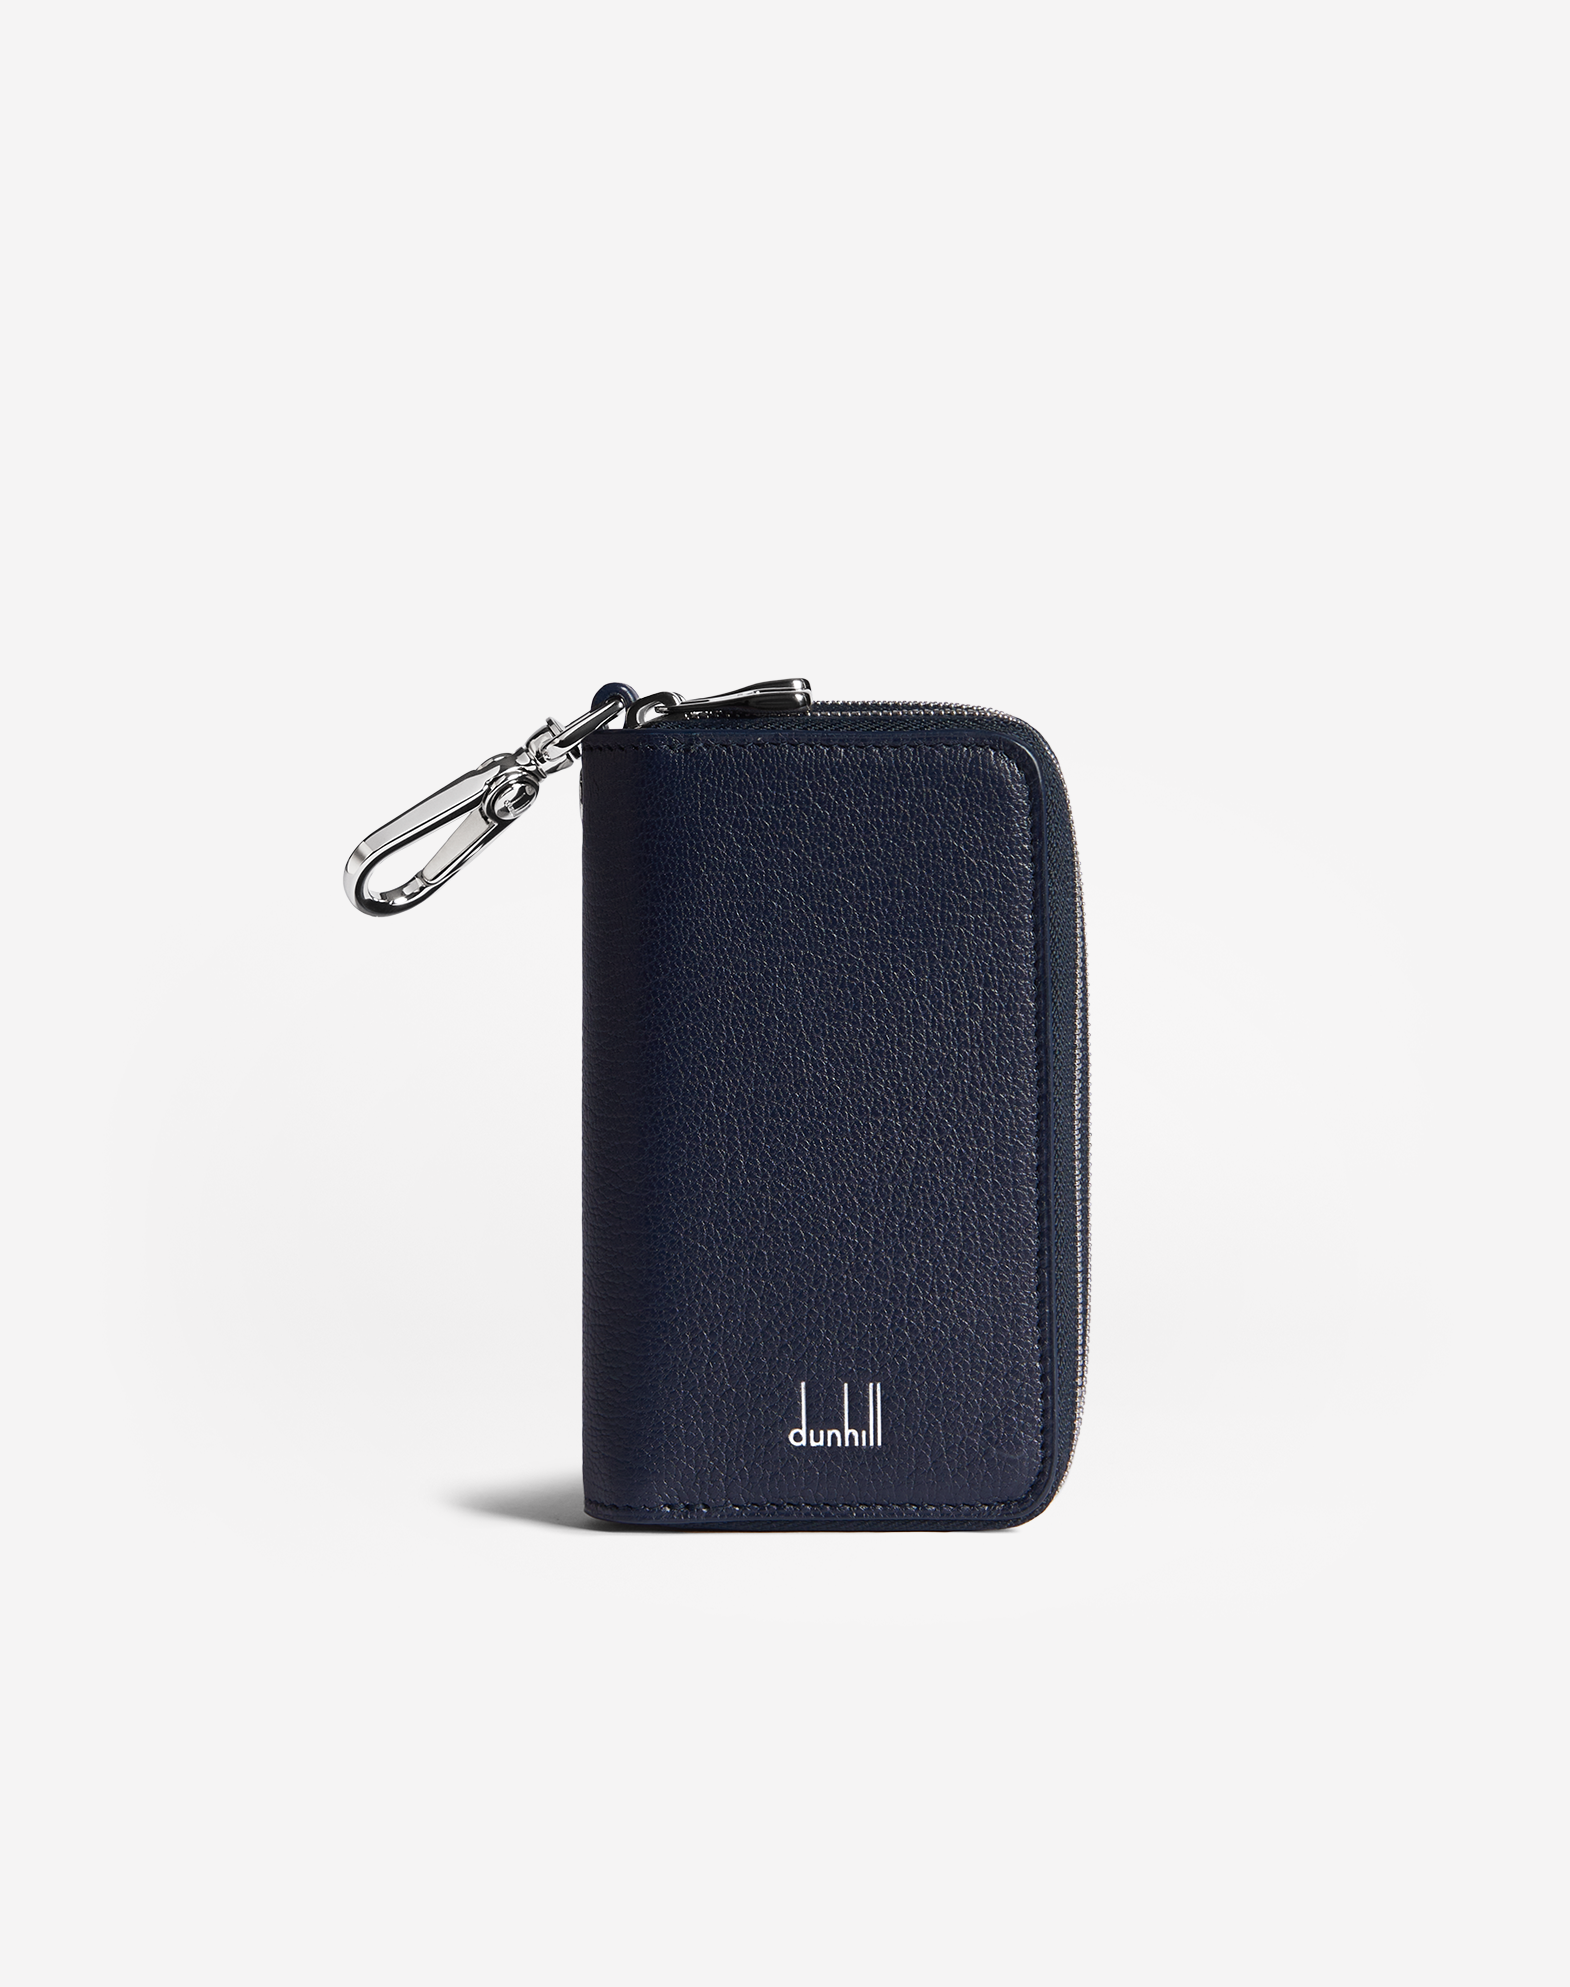 Dunhill Duke Fine Leather Key Case & Coin Purse In Blue